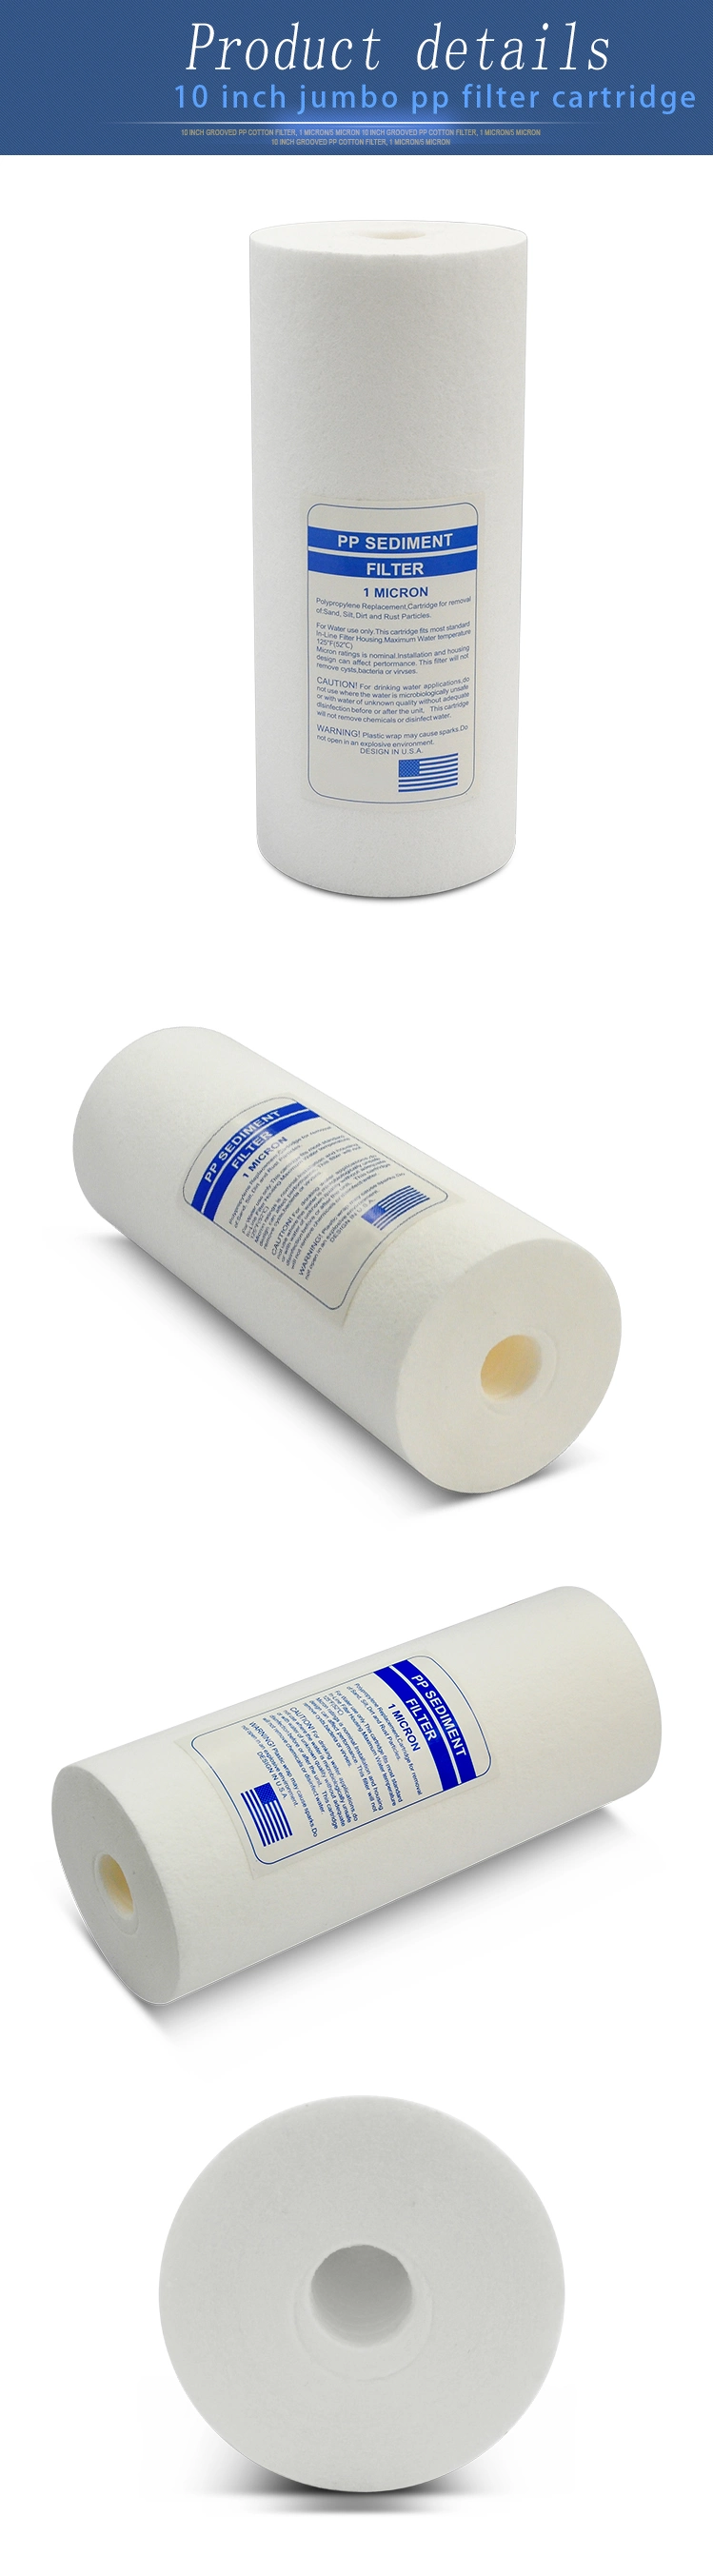 10 Inch Big PP Filter Cartridge for Water Filter